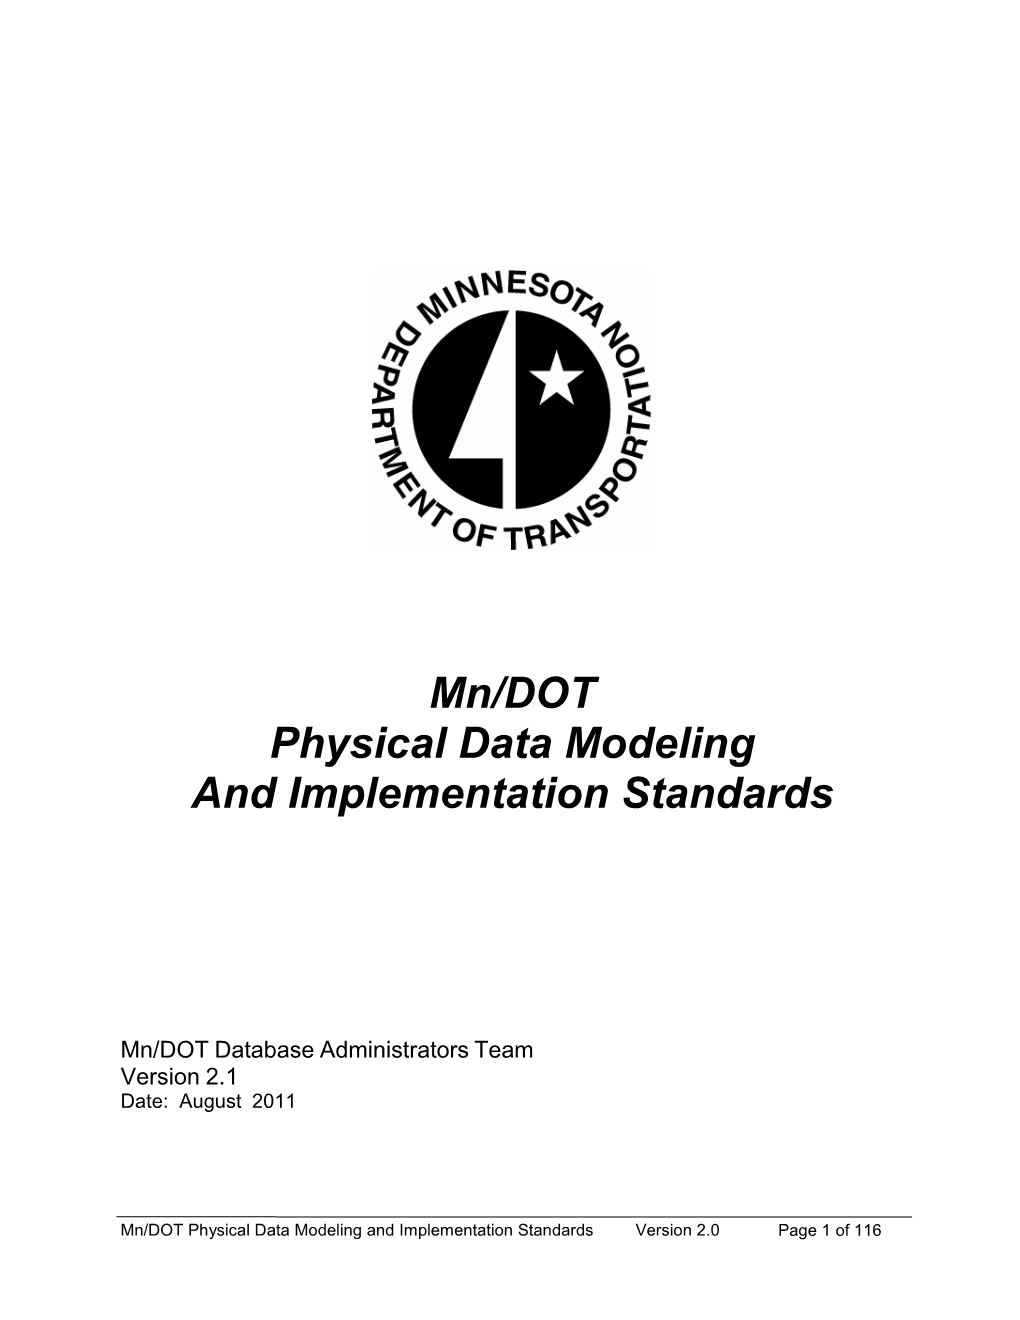 Mn/DOT Physical Data Modeling and Implementation Standards